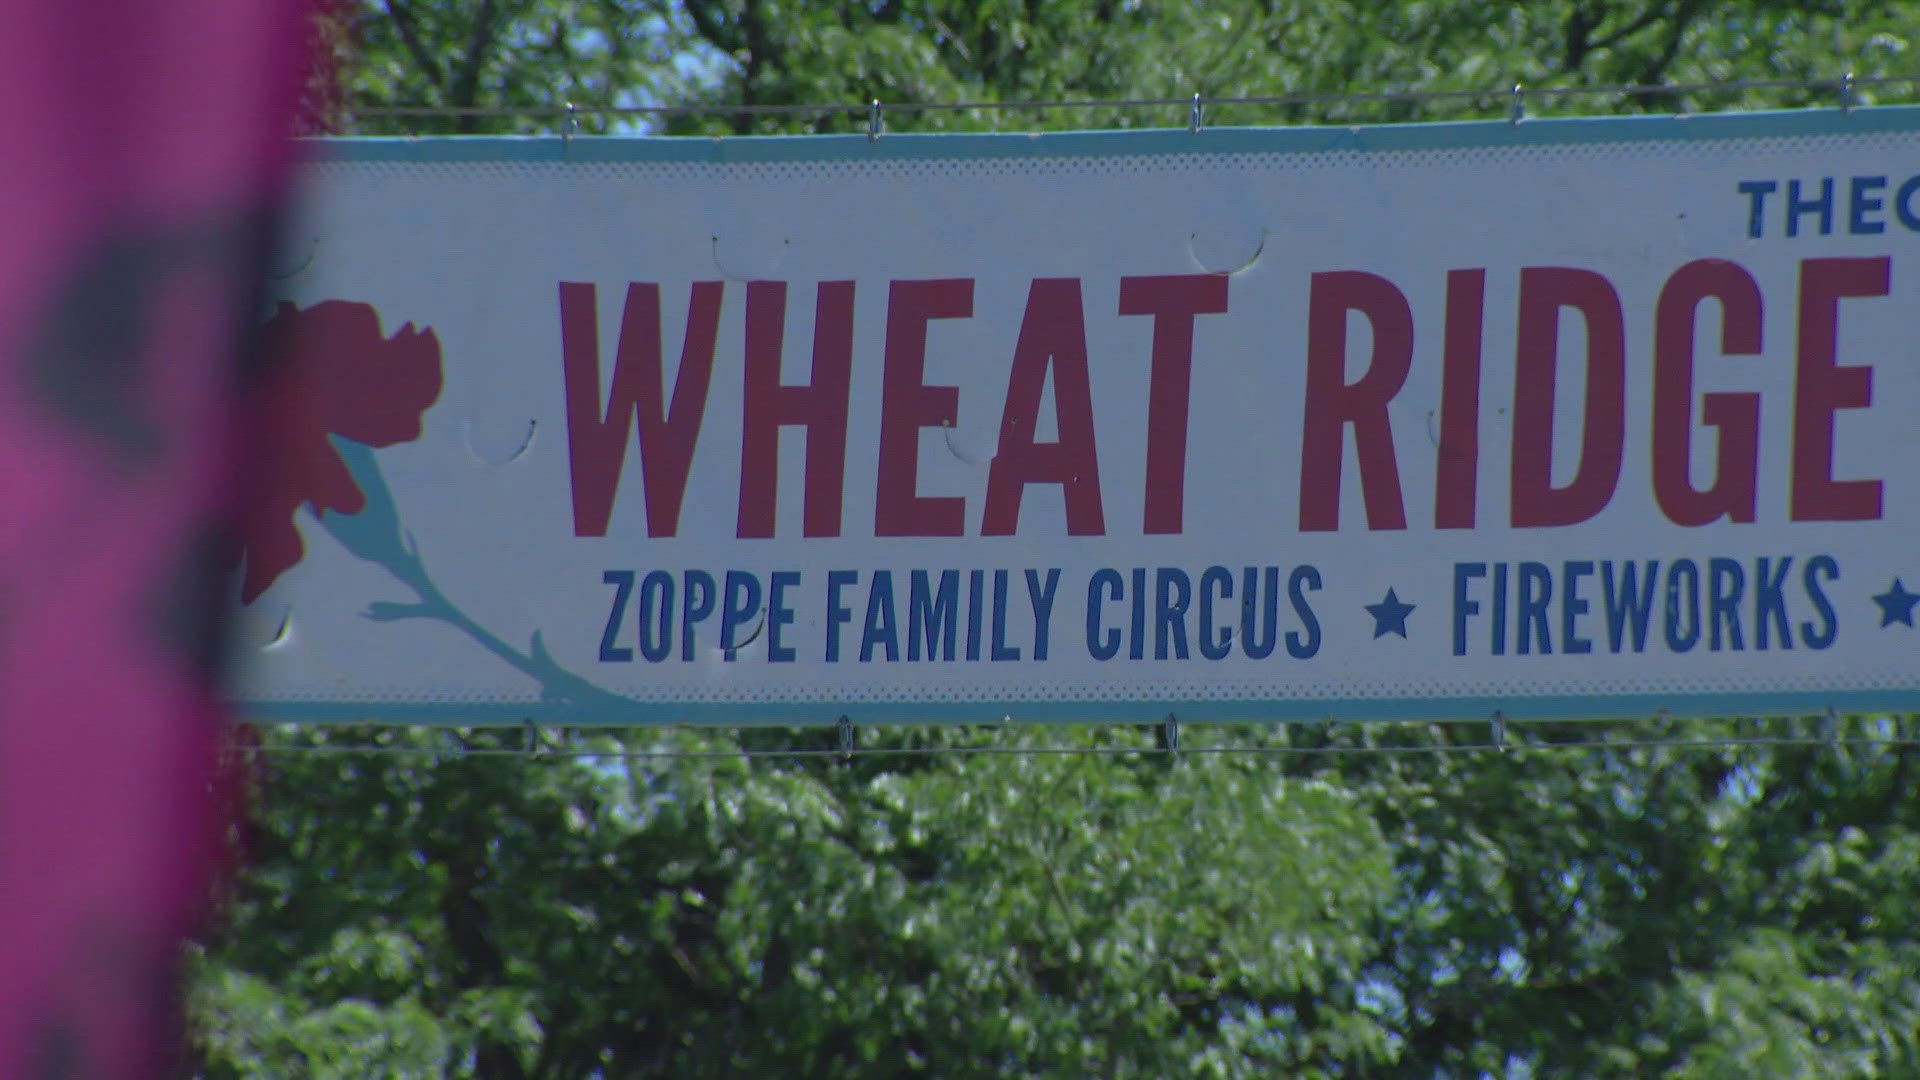 Wheat Ridge Police say it's worth making more of an effort to build a relationship and trust with business owners before anything bad happens in the neighborhood.